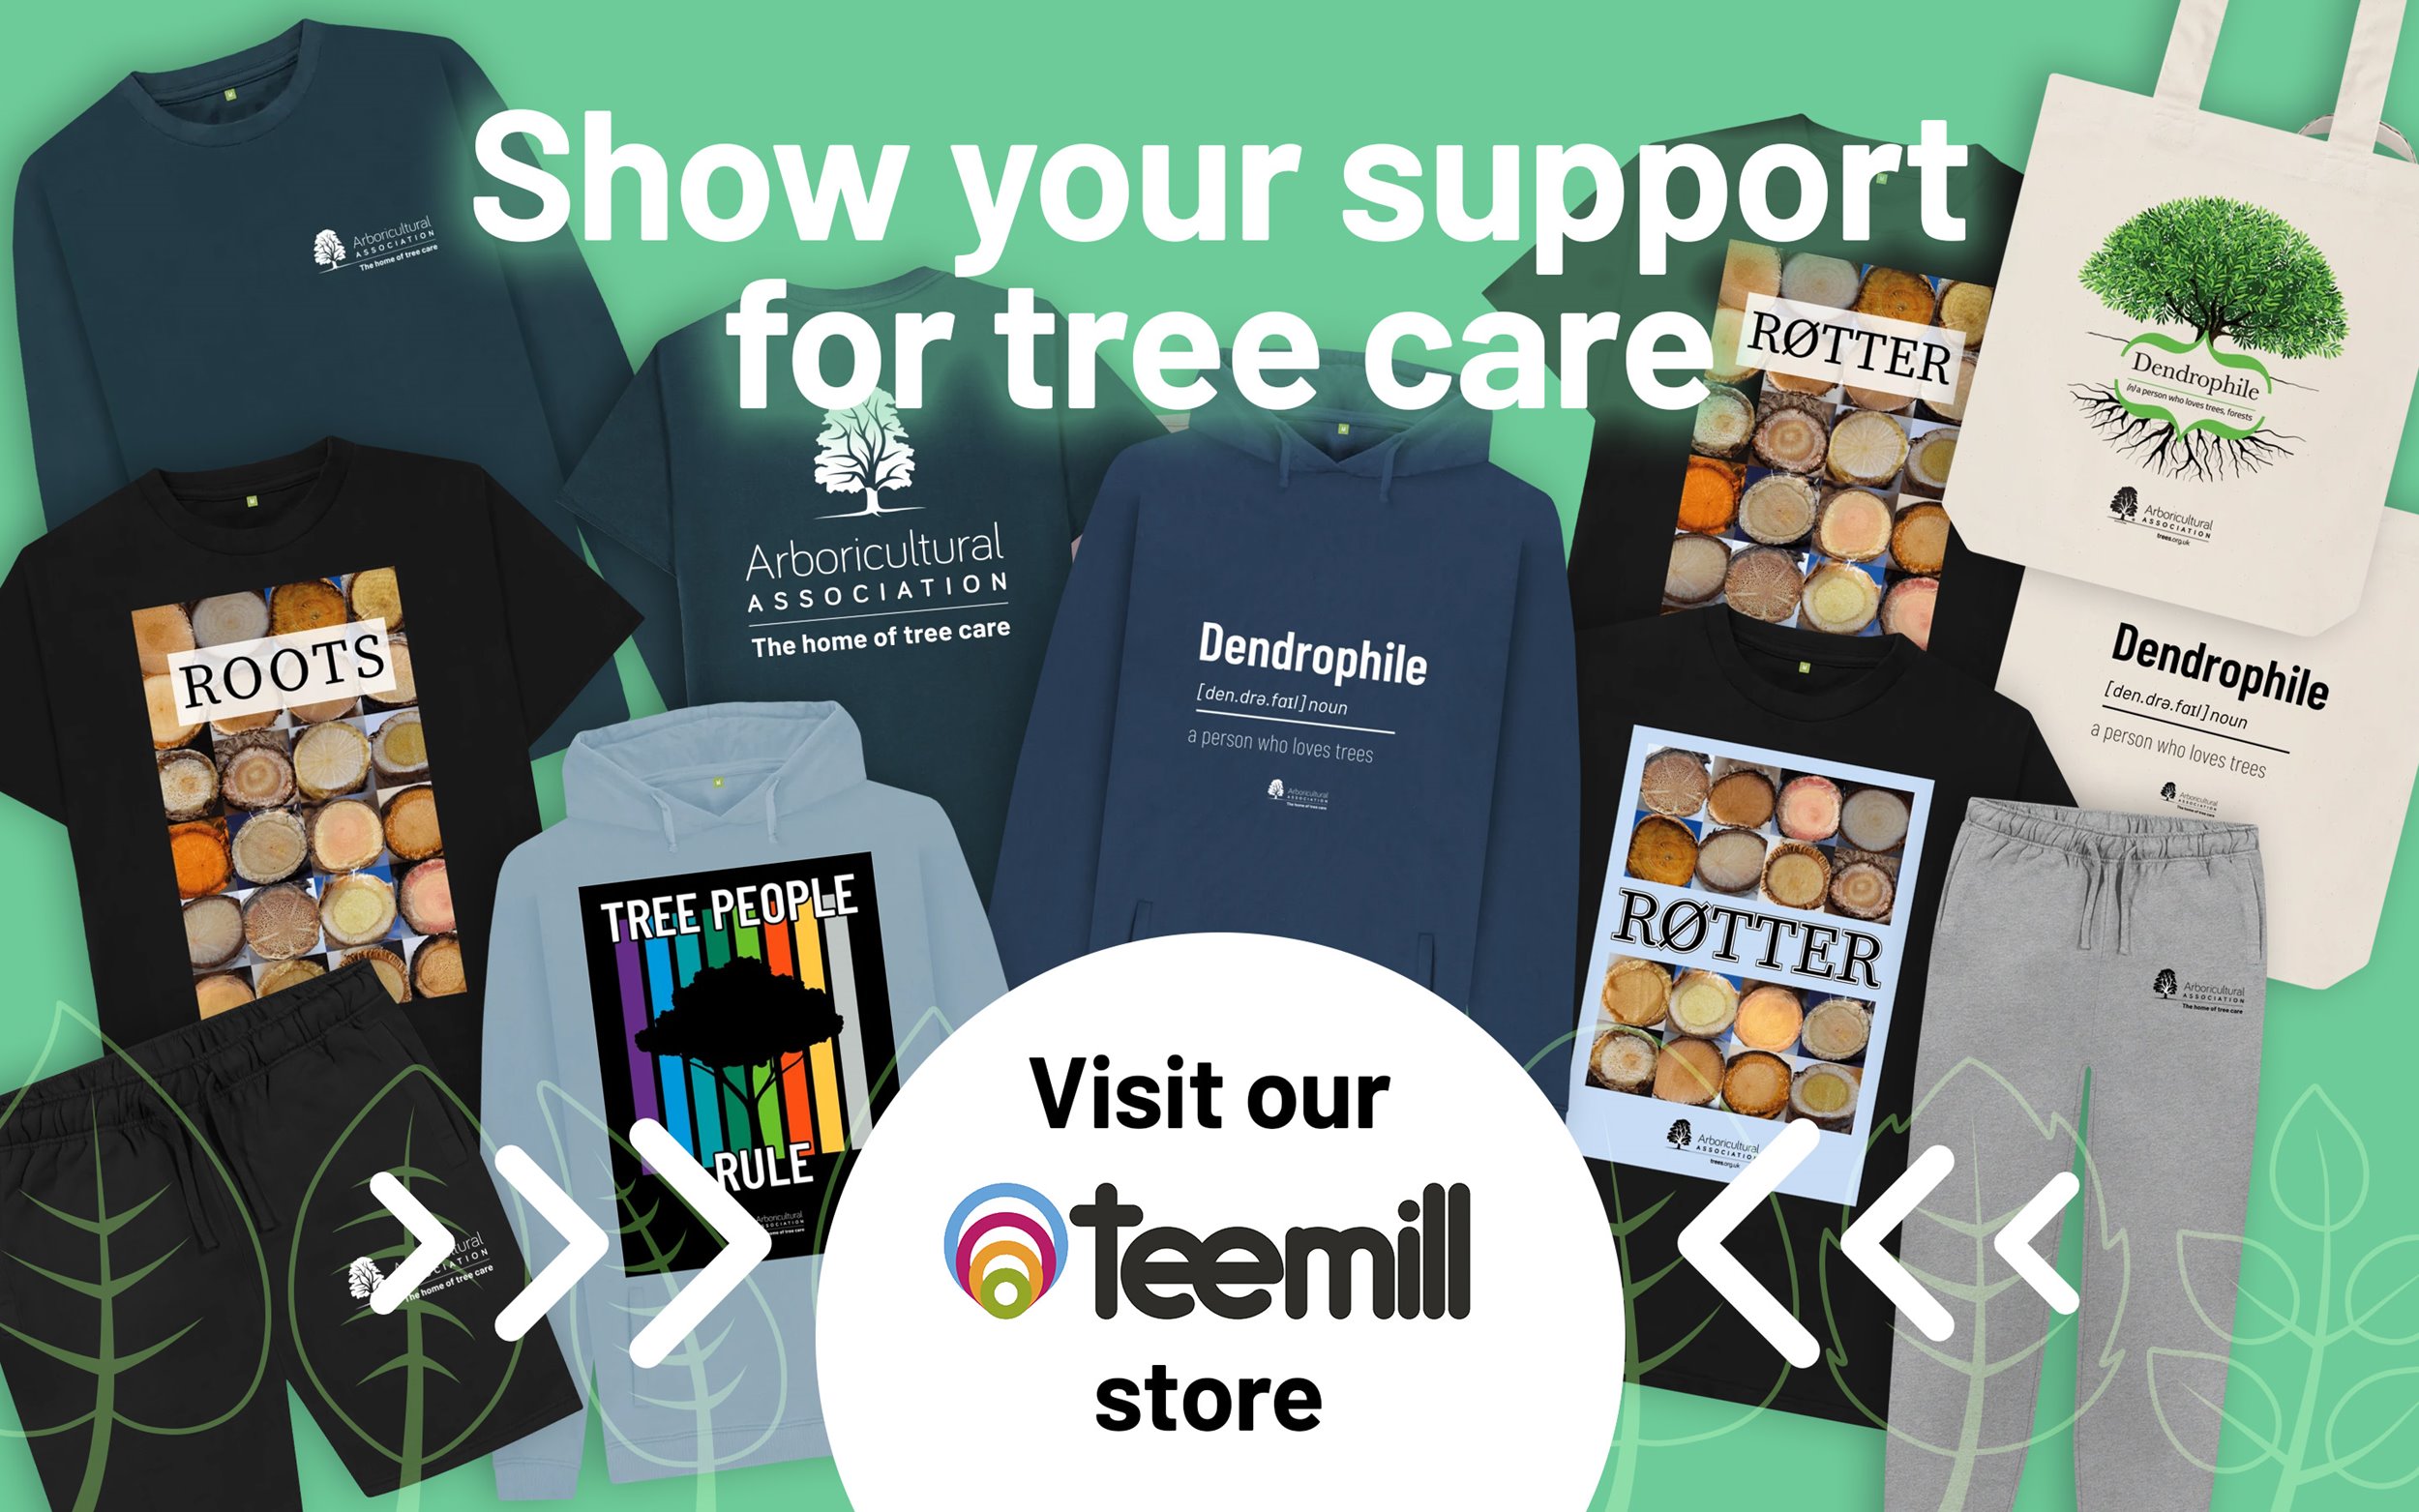 Show your support for tree care – Visit our teemill store